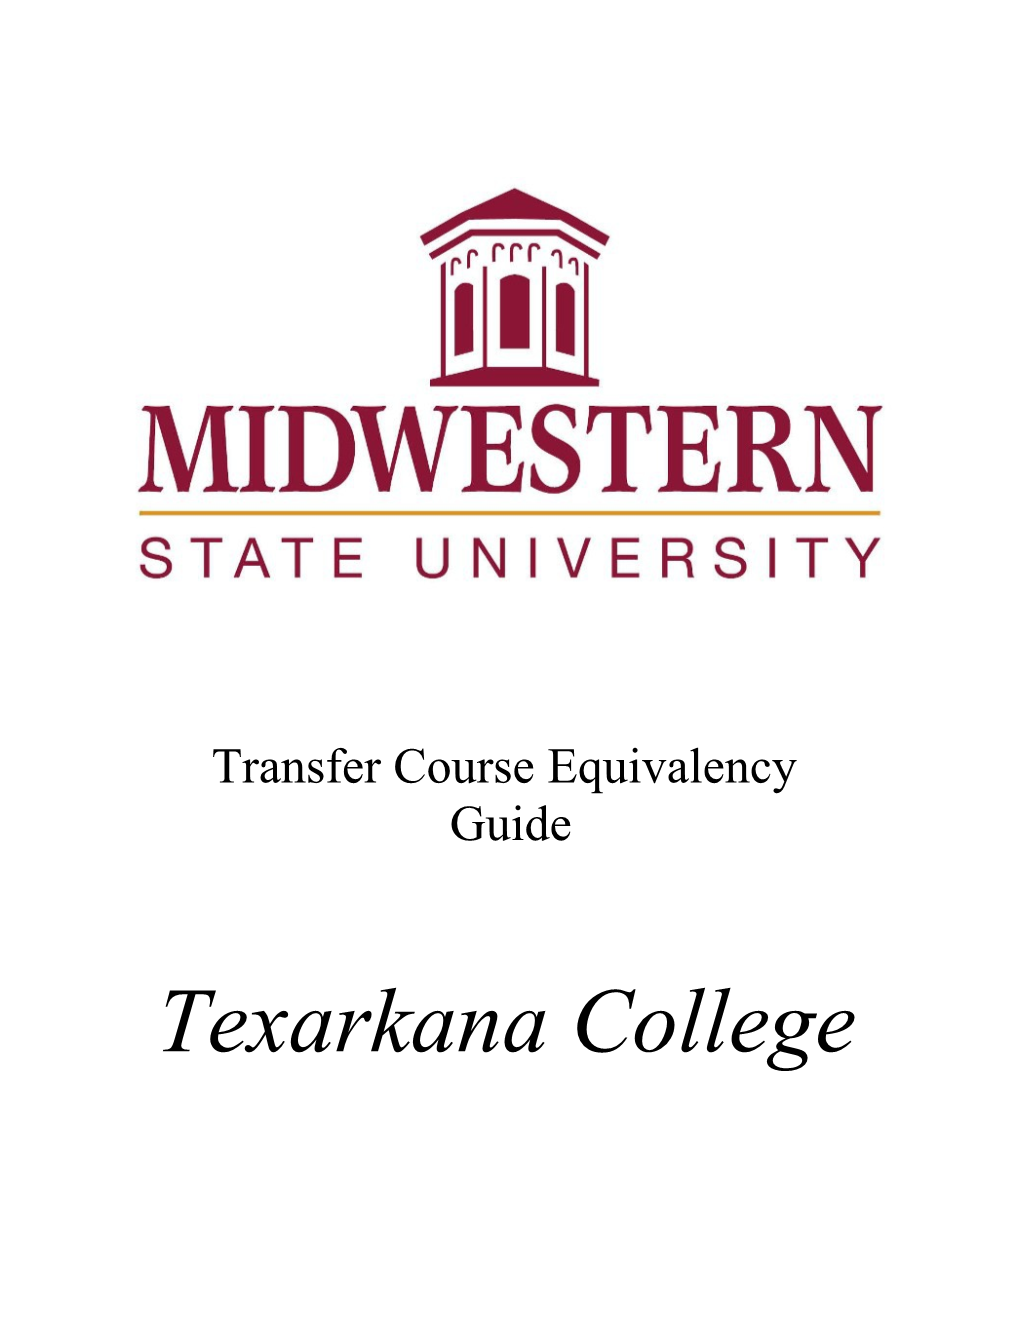 Use This Checklist to Mark the Courses Taken at Texarkana College